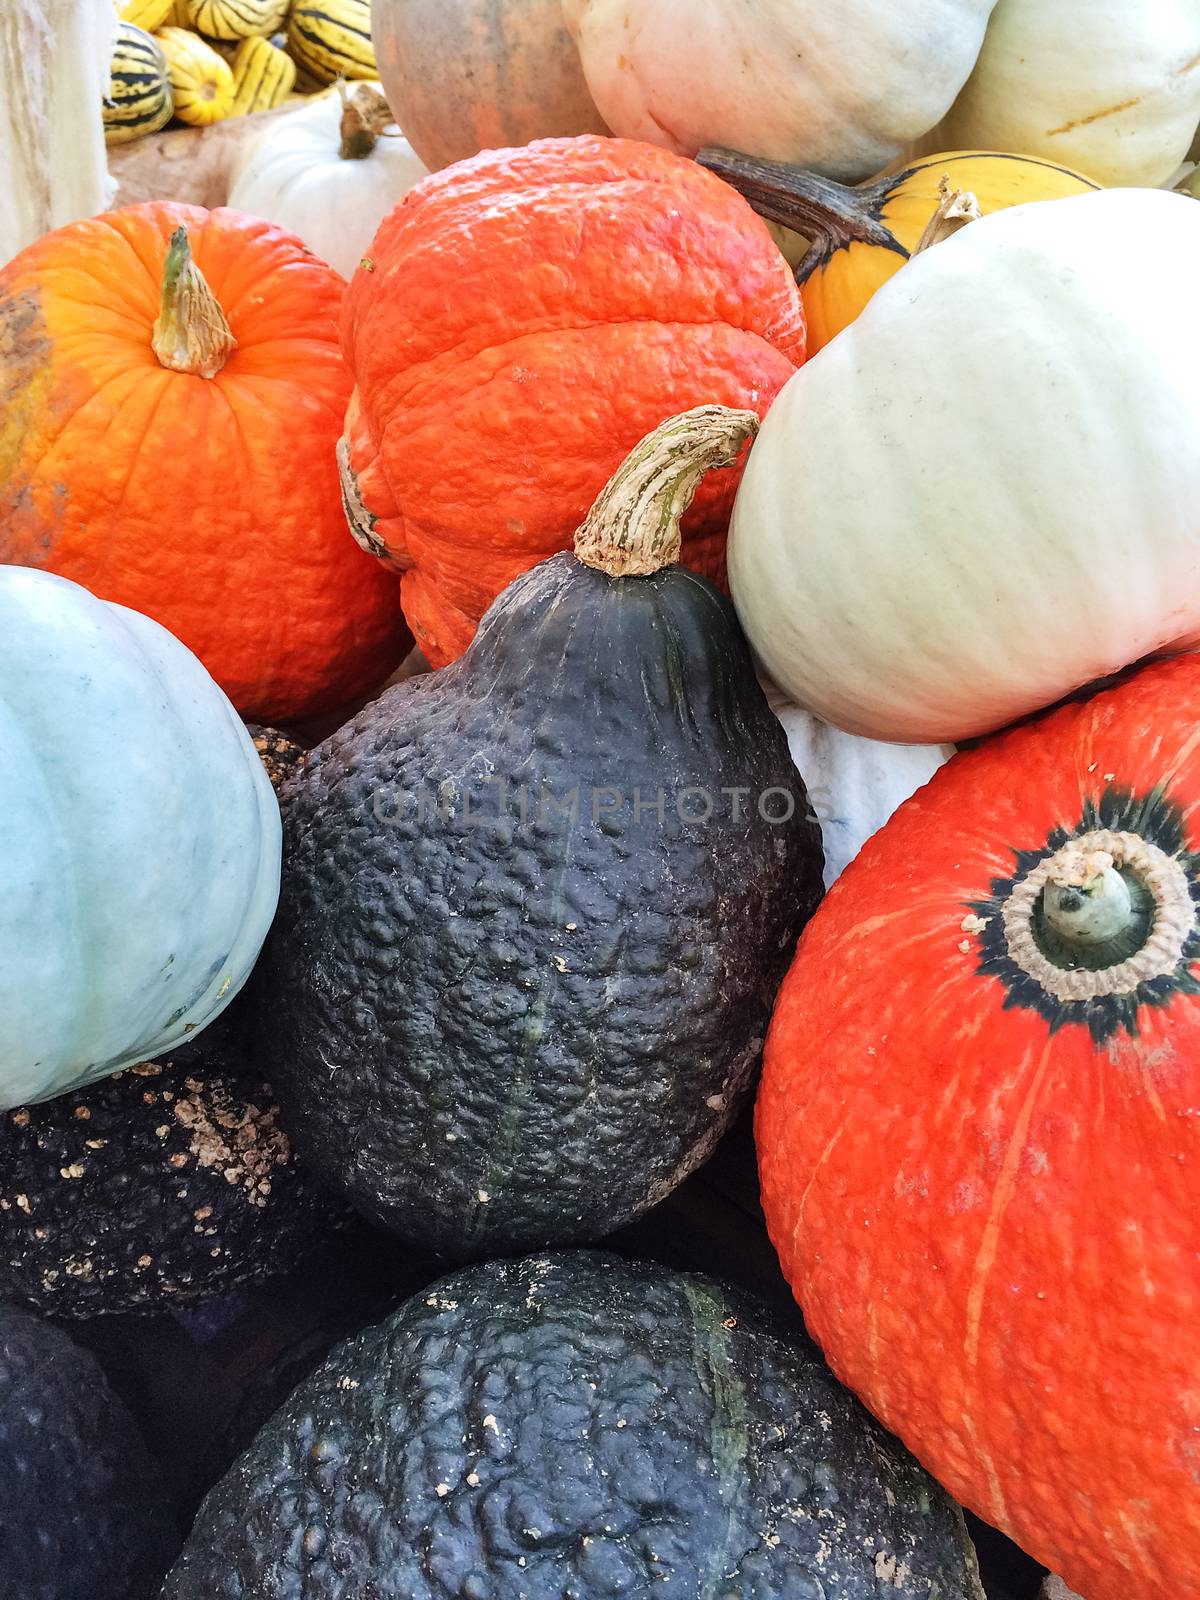 Colorful autumn vegetables at the autumn market. Variety of squashes.